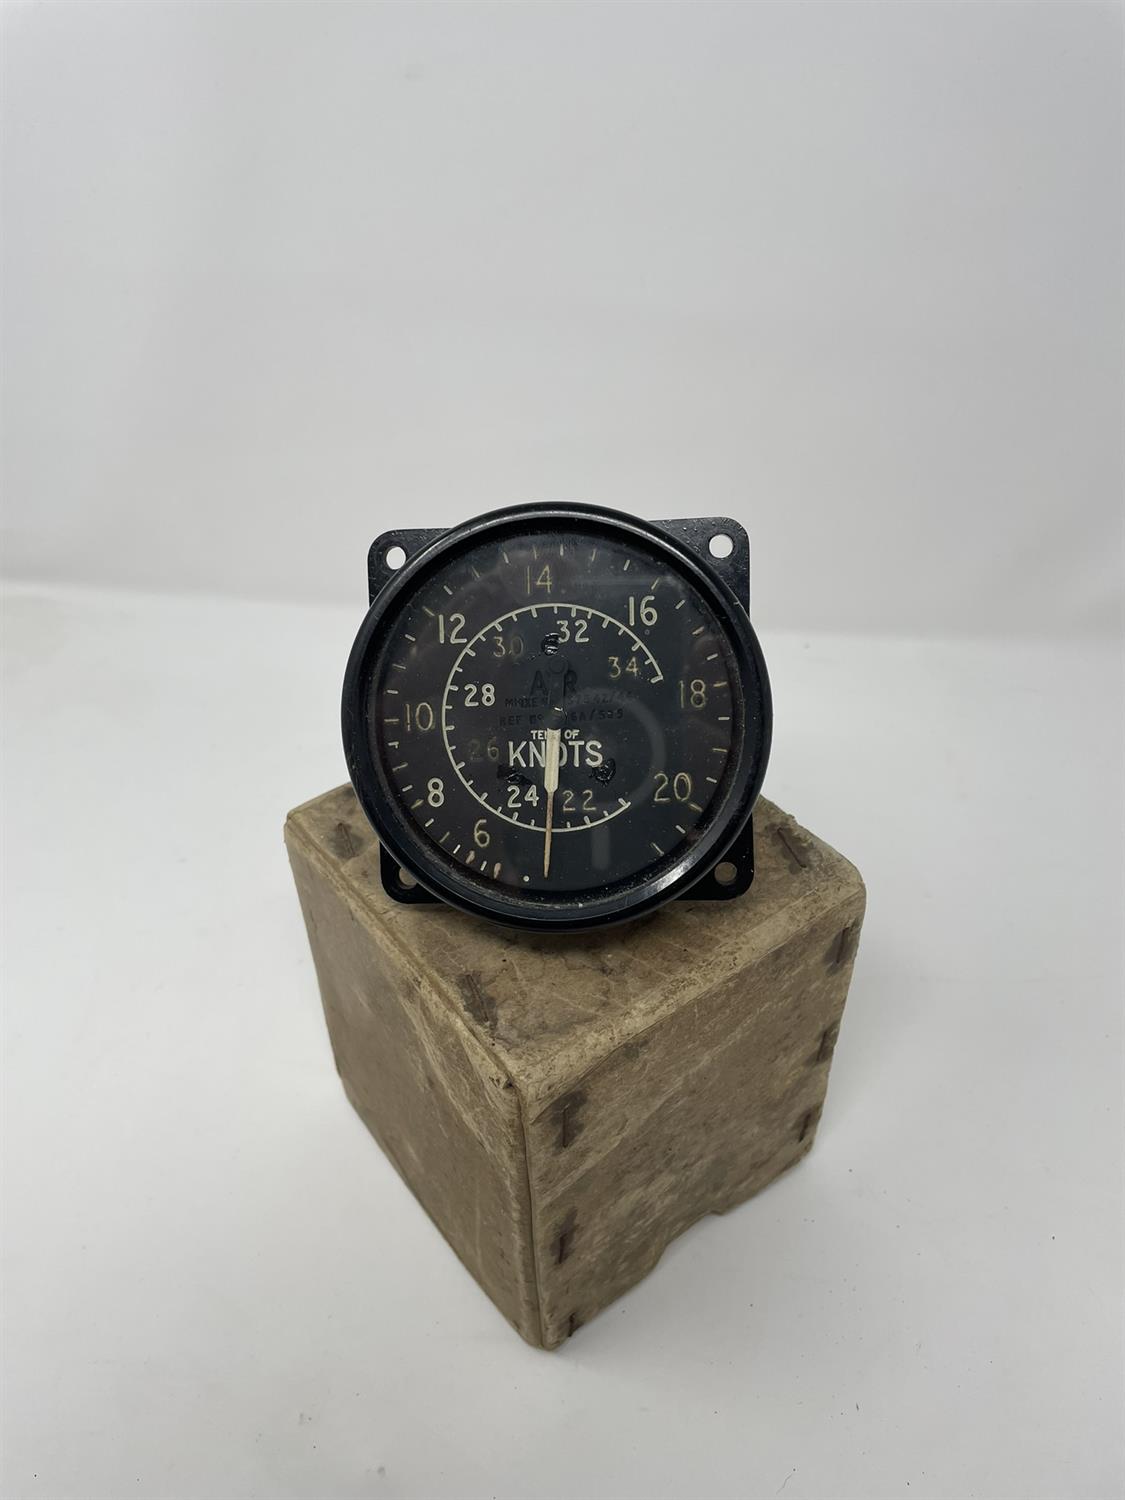 Airspeed Indicator in Knots with Period-Correct Box Dated 1944* - Image 7 of 10